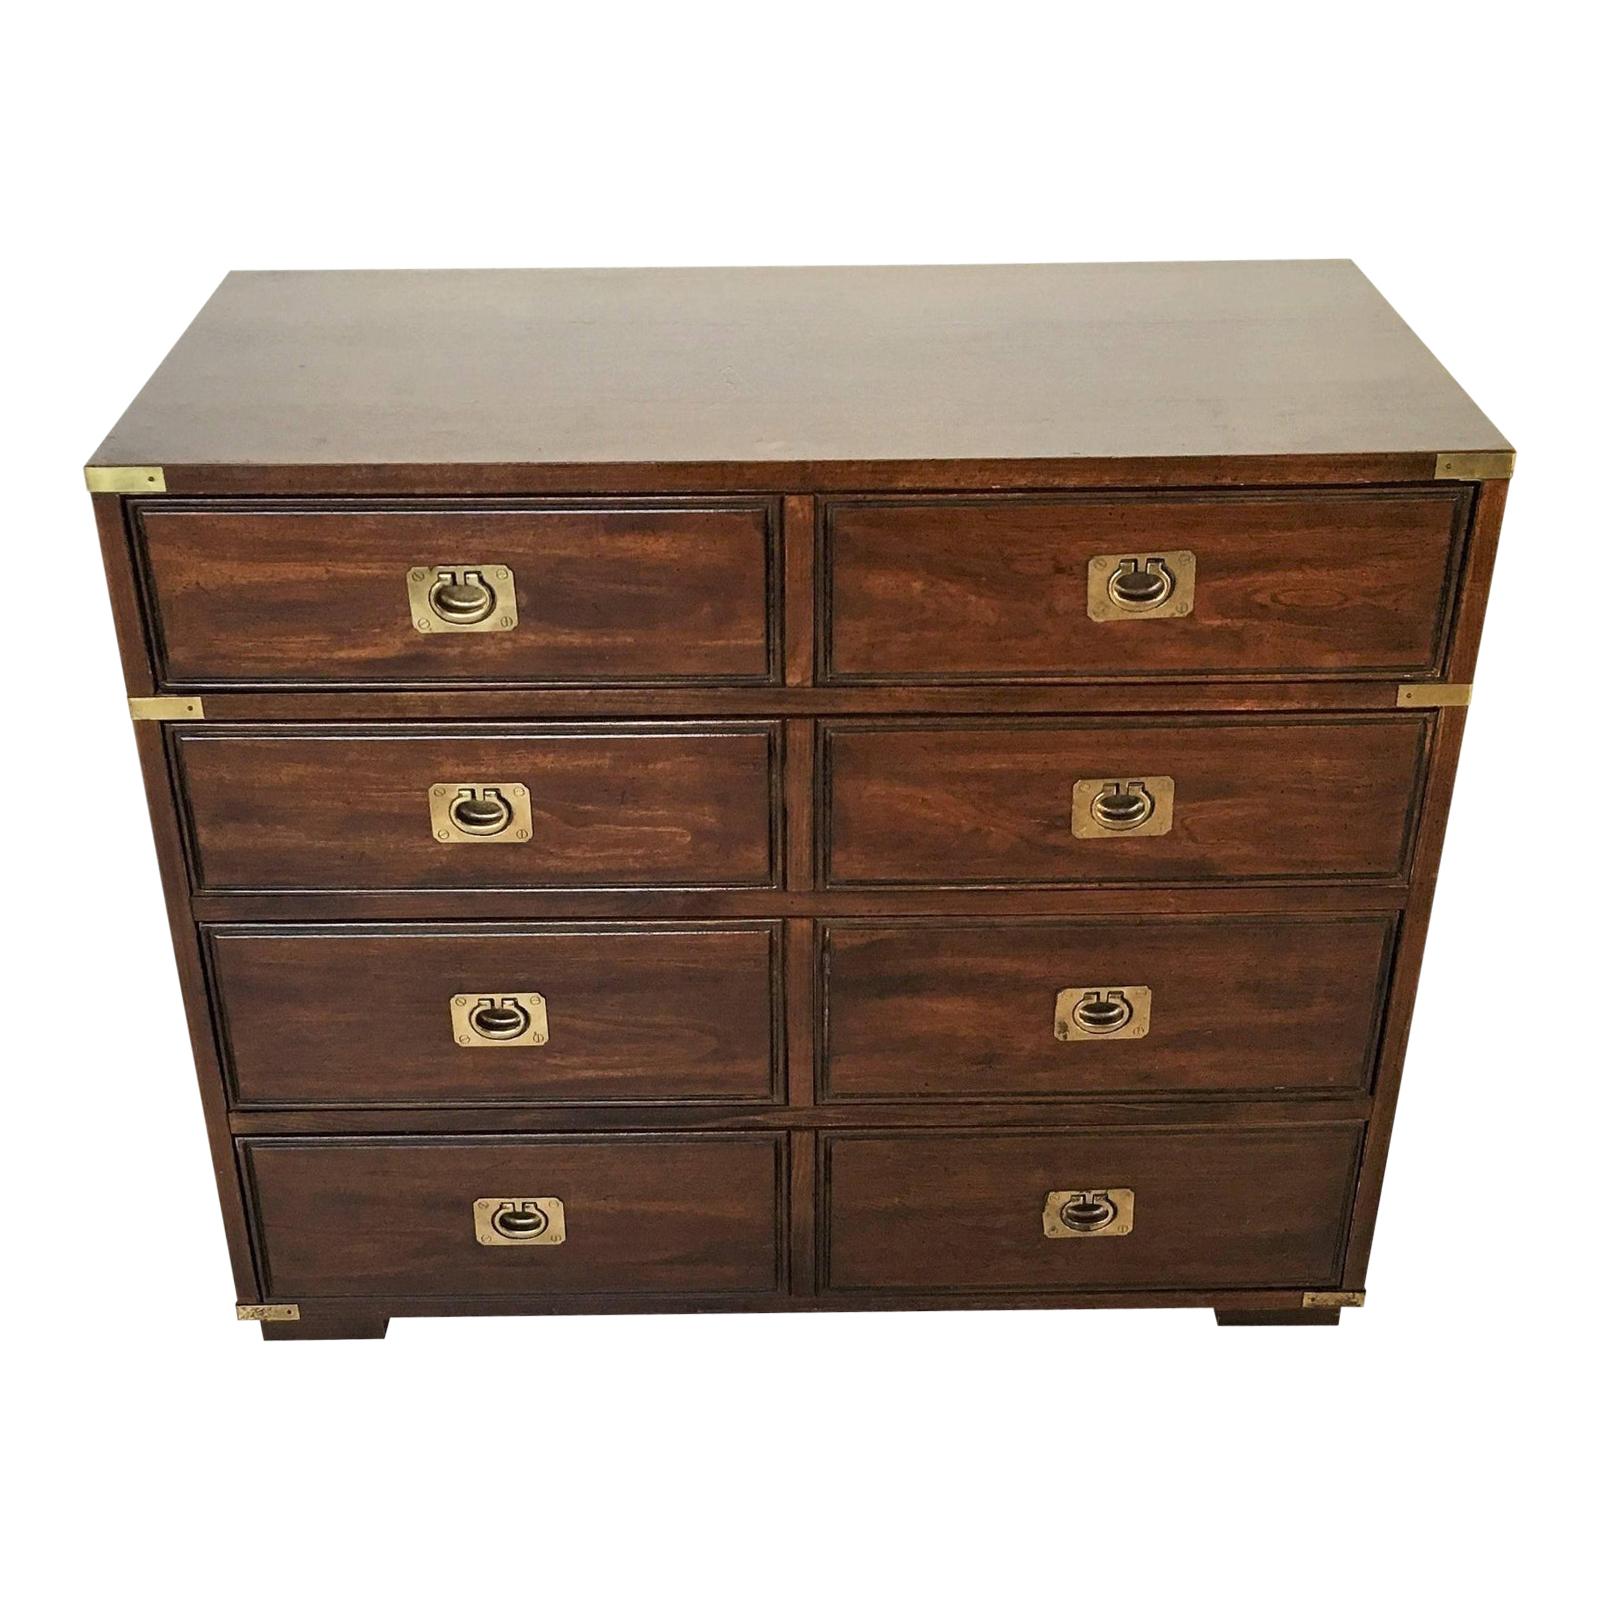 Military Officer's Campaign Style Bachelor Chest or Dresser